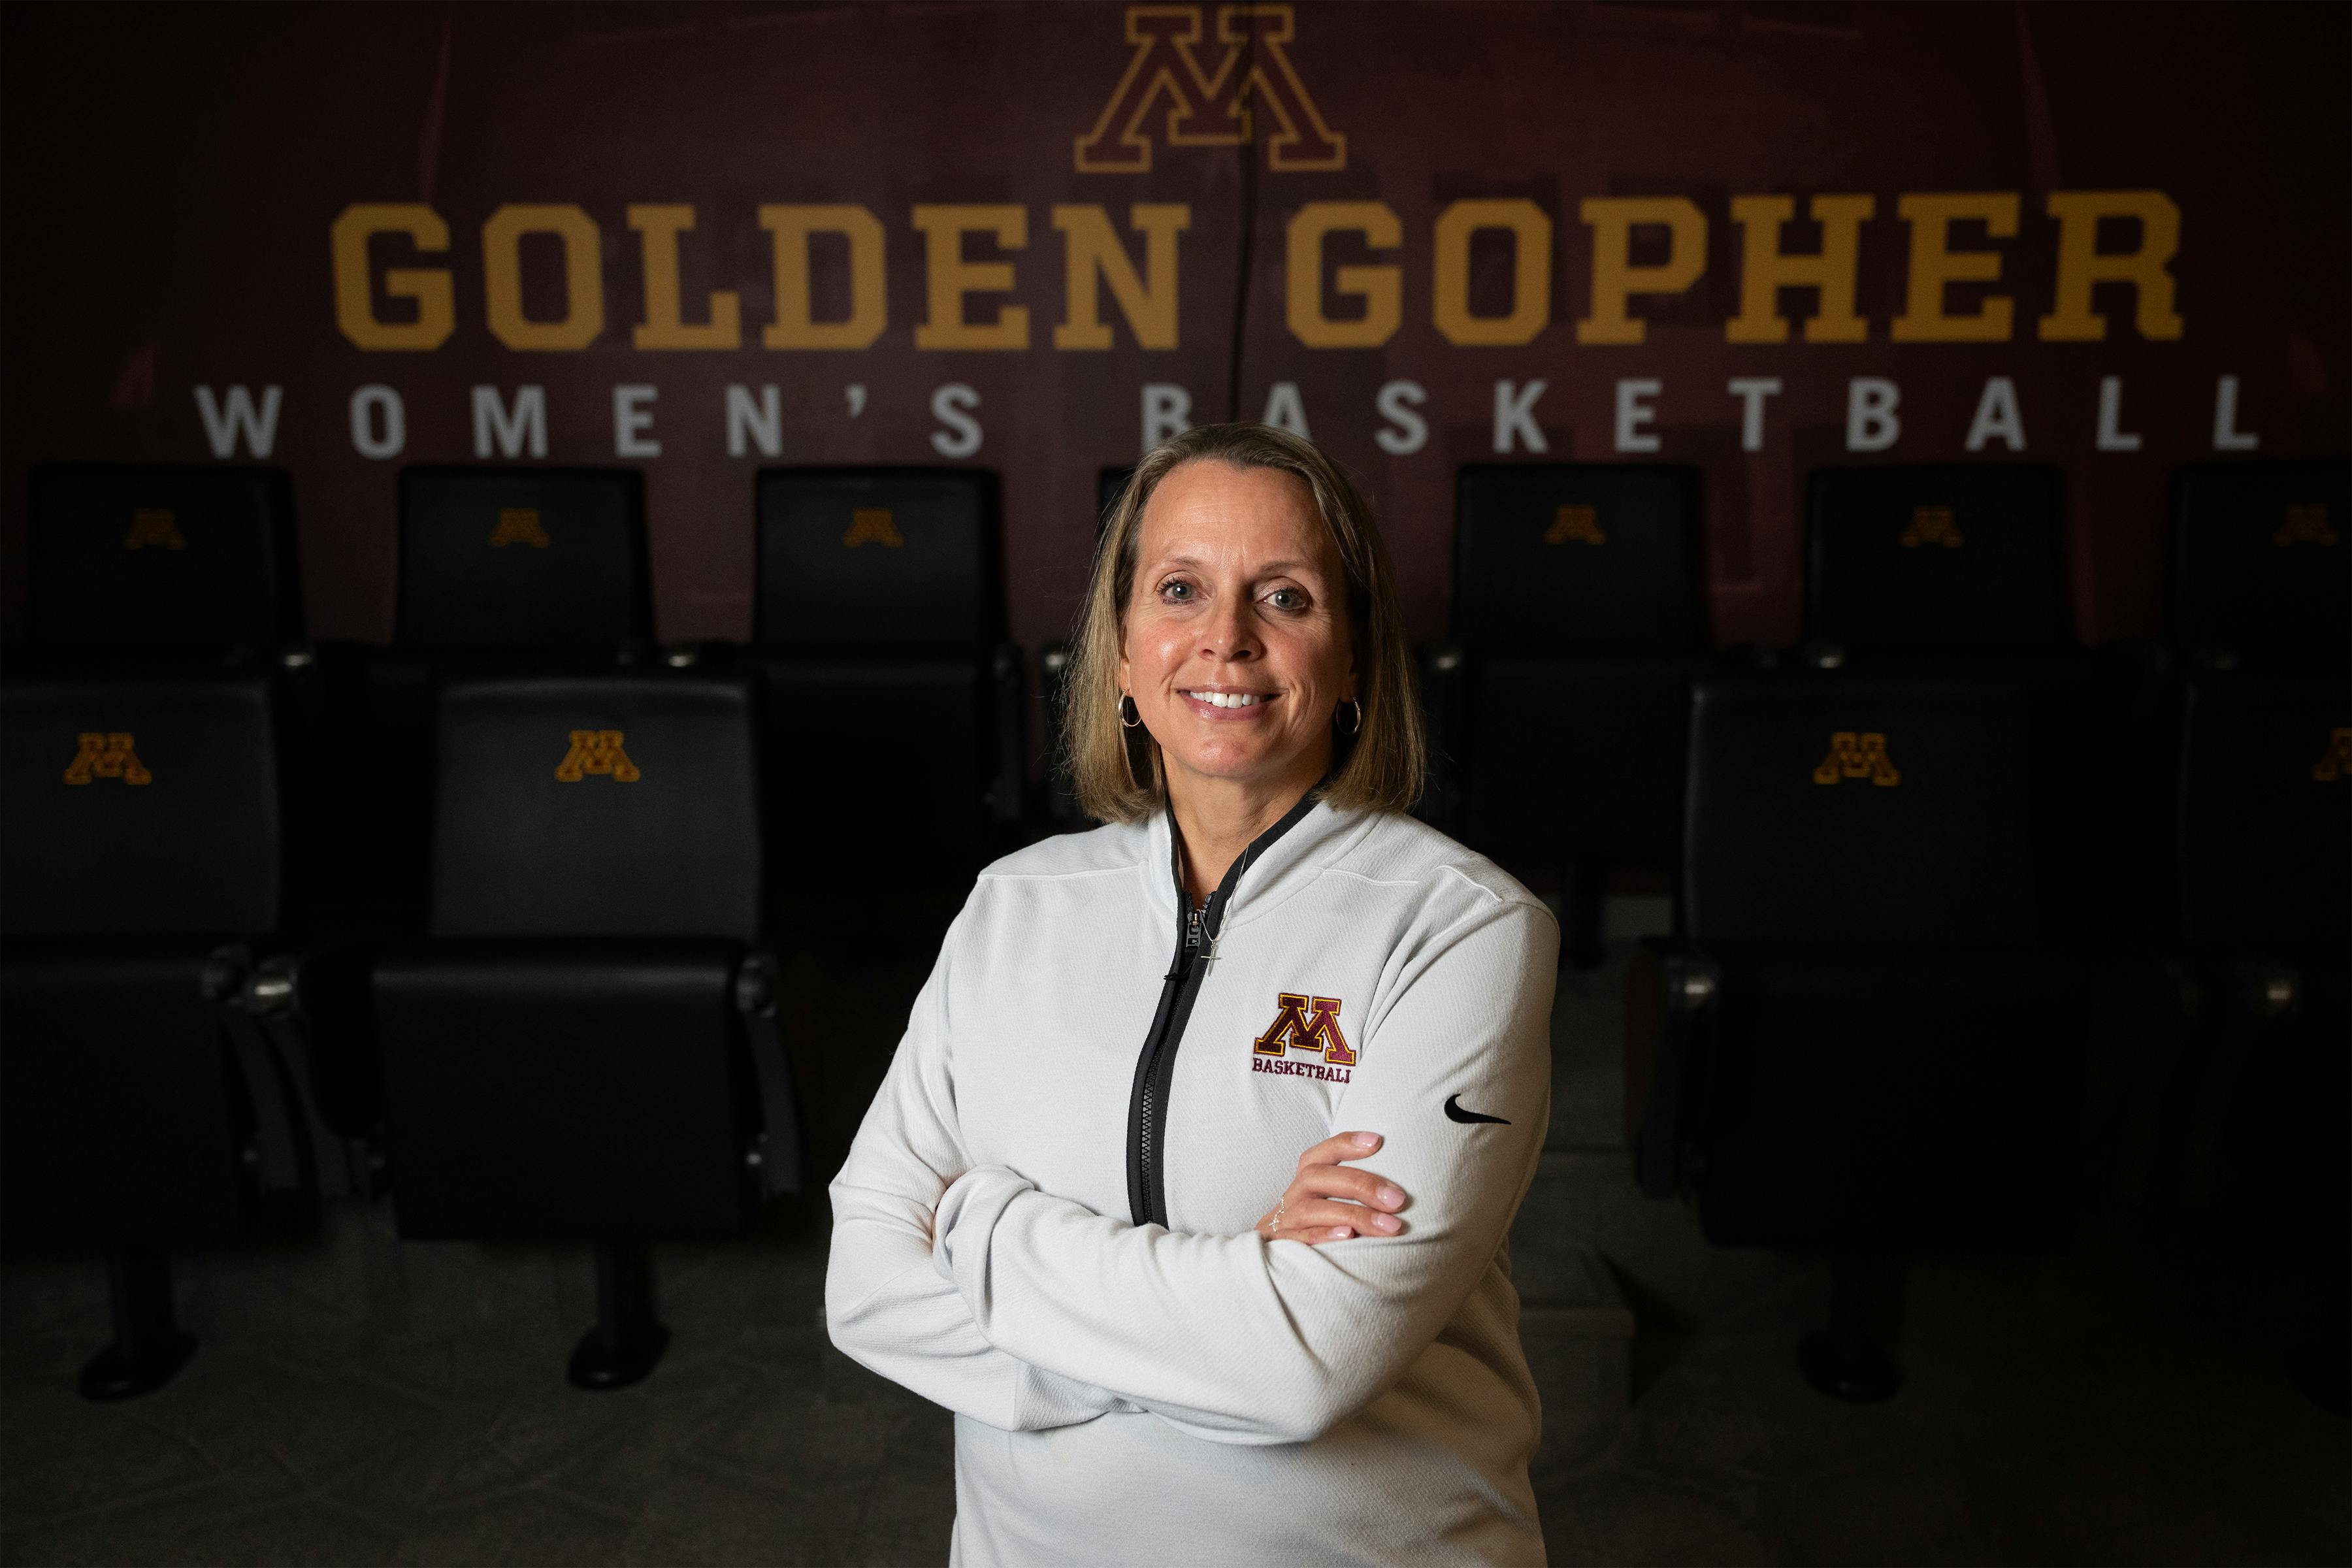 Incoming Gophers women's basketball coach knows success starts at home   and with her inherited squad intact - MinnPost